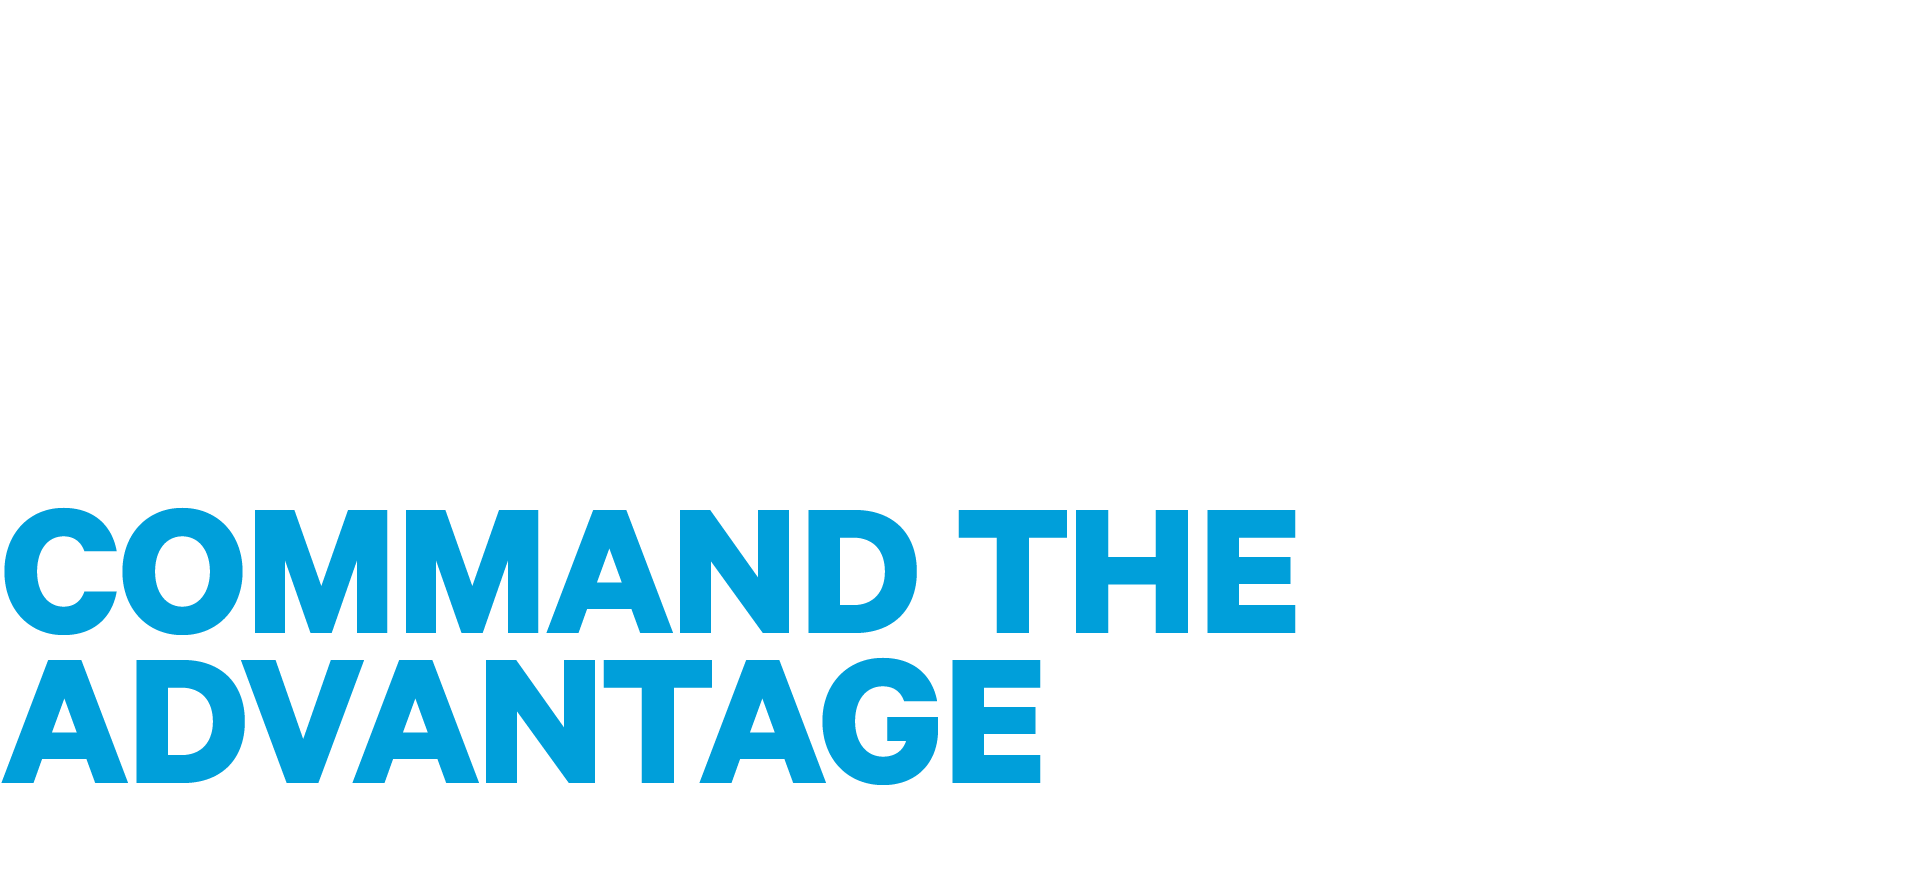 High-speed broadband you can count on Command the Advantage